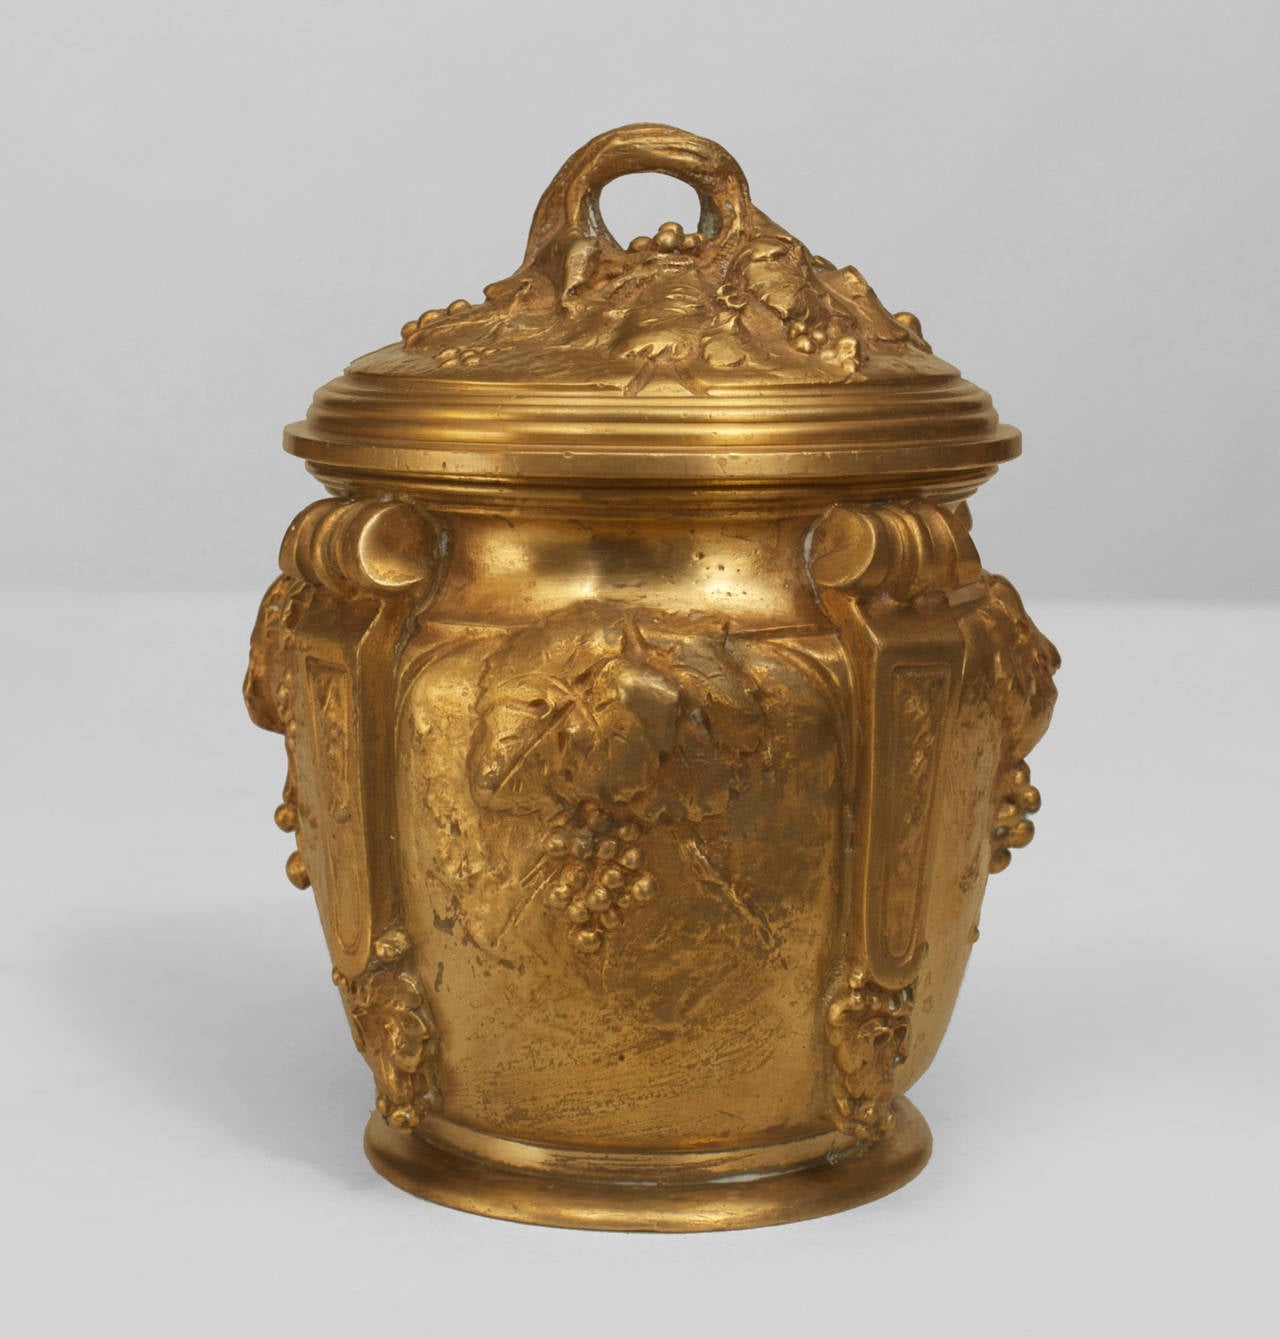 French Art Nouveau gilt bronze round box with 4 scrolls and a floral relief design with a cover (signed: MARIONNET)
